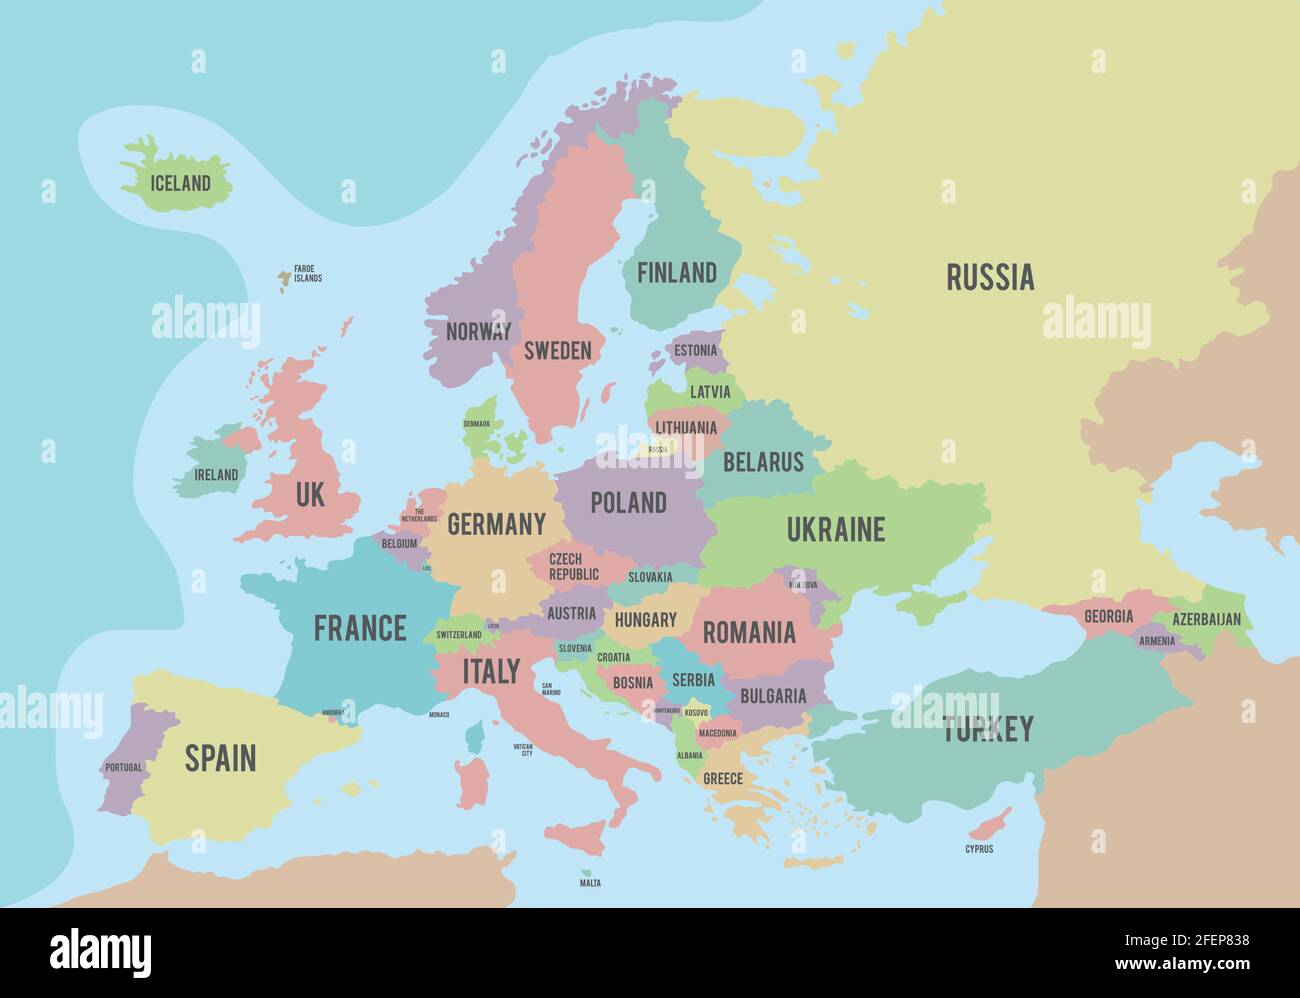 Political map of Europe with different colors for each country and names in English. Vector illustration. Stock Vector